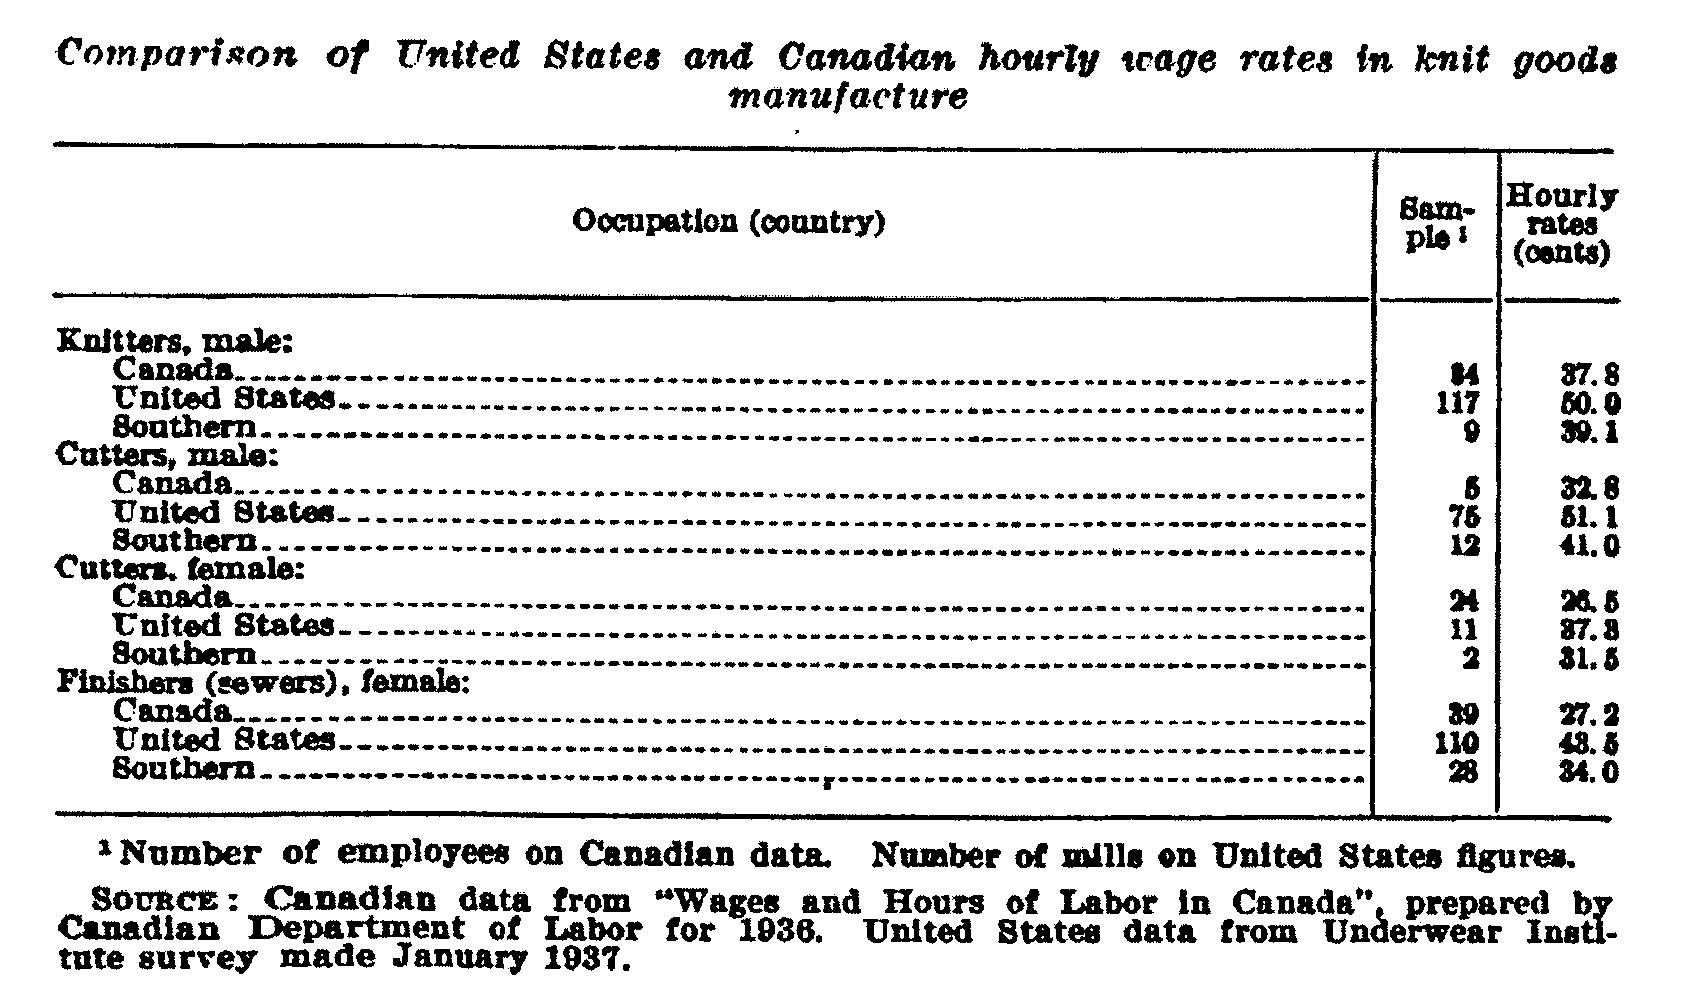 Comparison of U.S. and Canada houly wage rates in knit goods manufacture